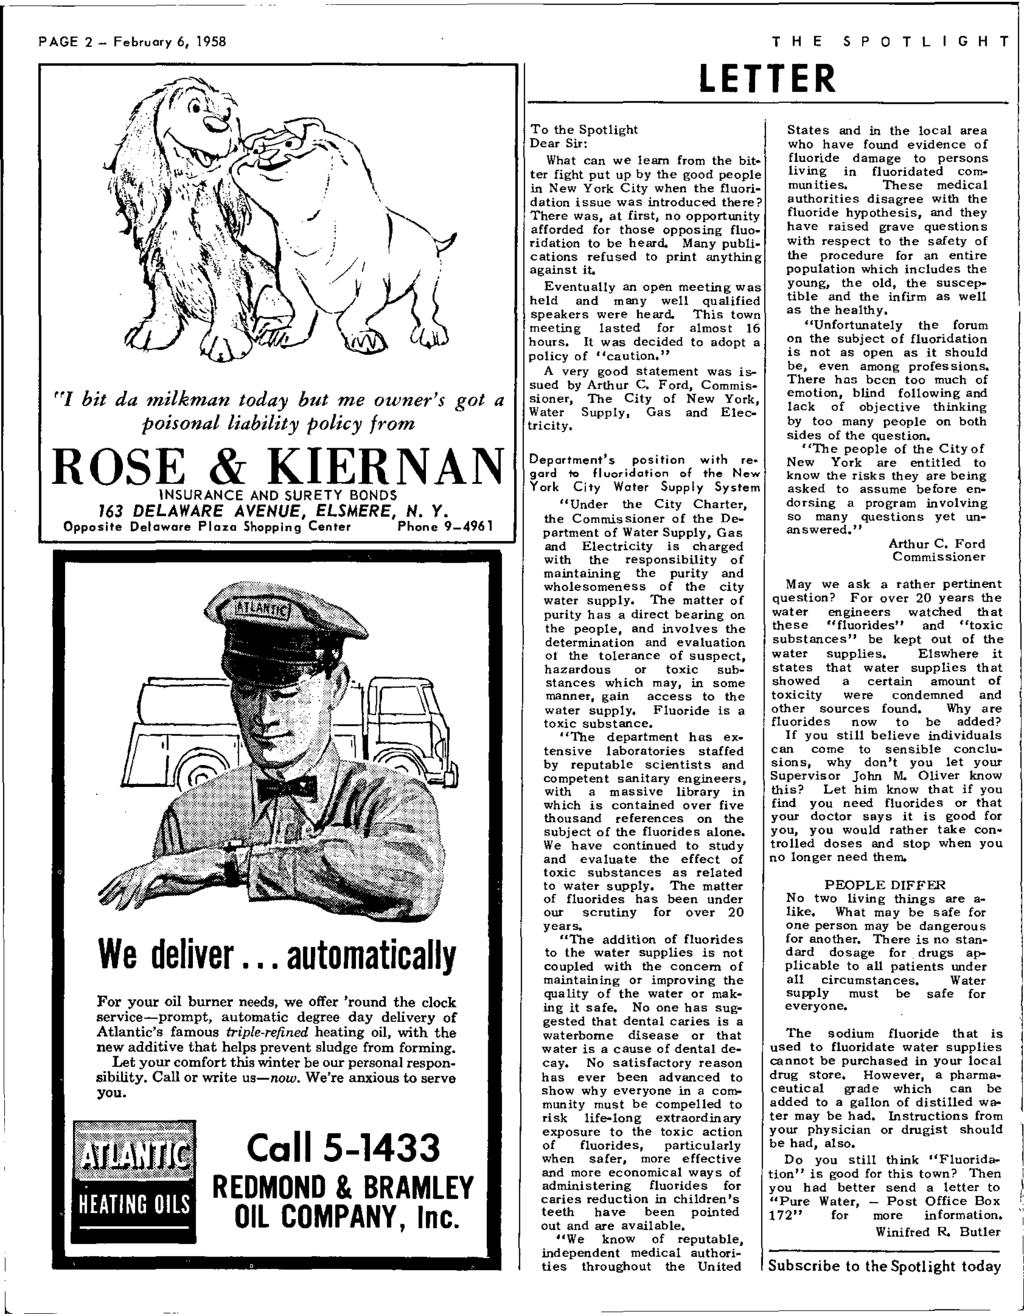 PAGE 2 - February 6, 1958 T H E LETTER SPOTLIGHT "I bit da milkman today but me owner's got a poisonal liability policy from ROSE & KIERNAN INSURANCE AND SURETY BONOS 163 DELAWARE AVENUE, ELSMERE, N.